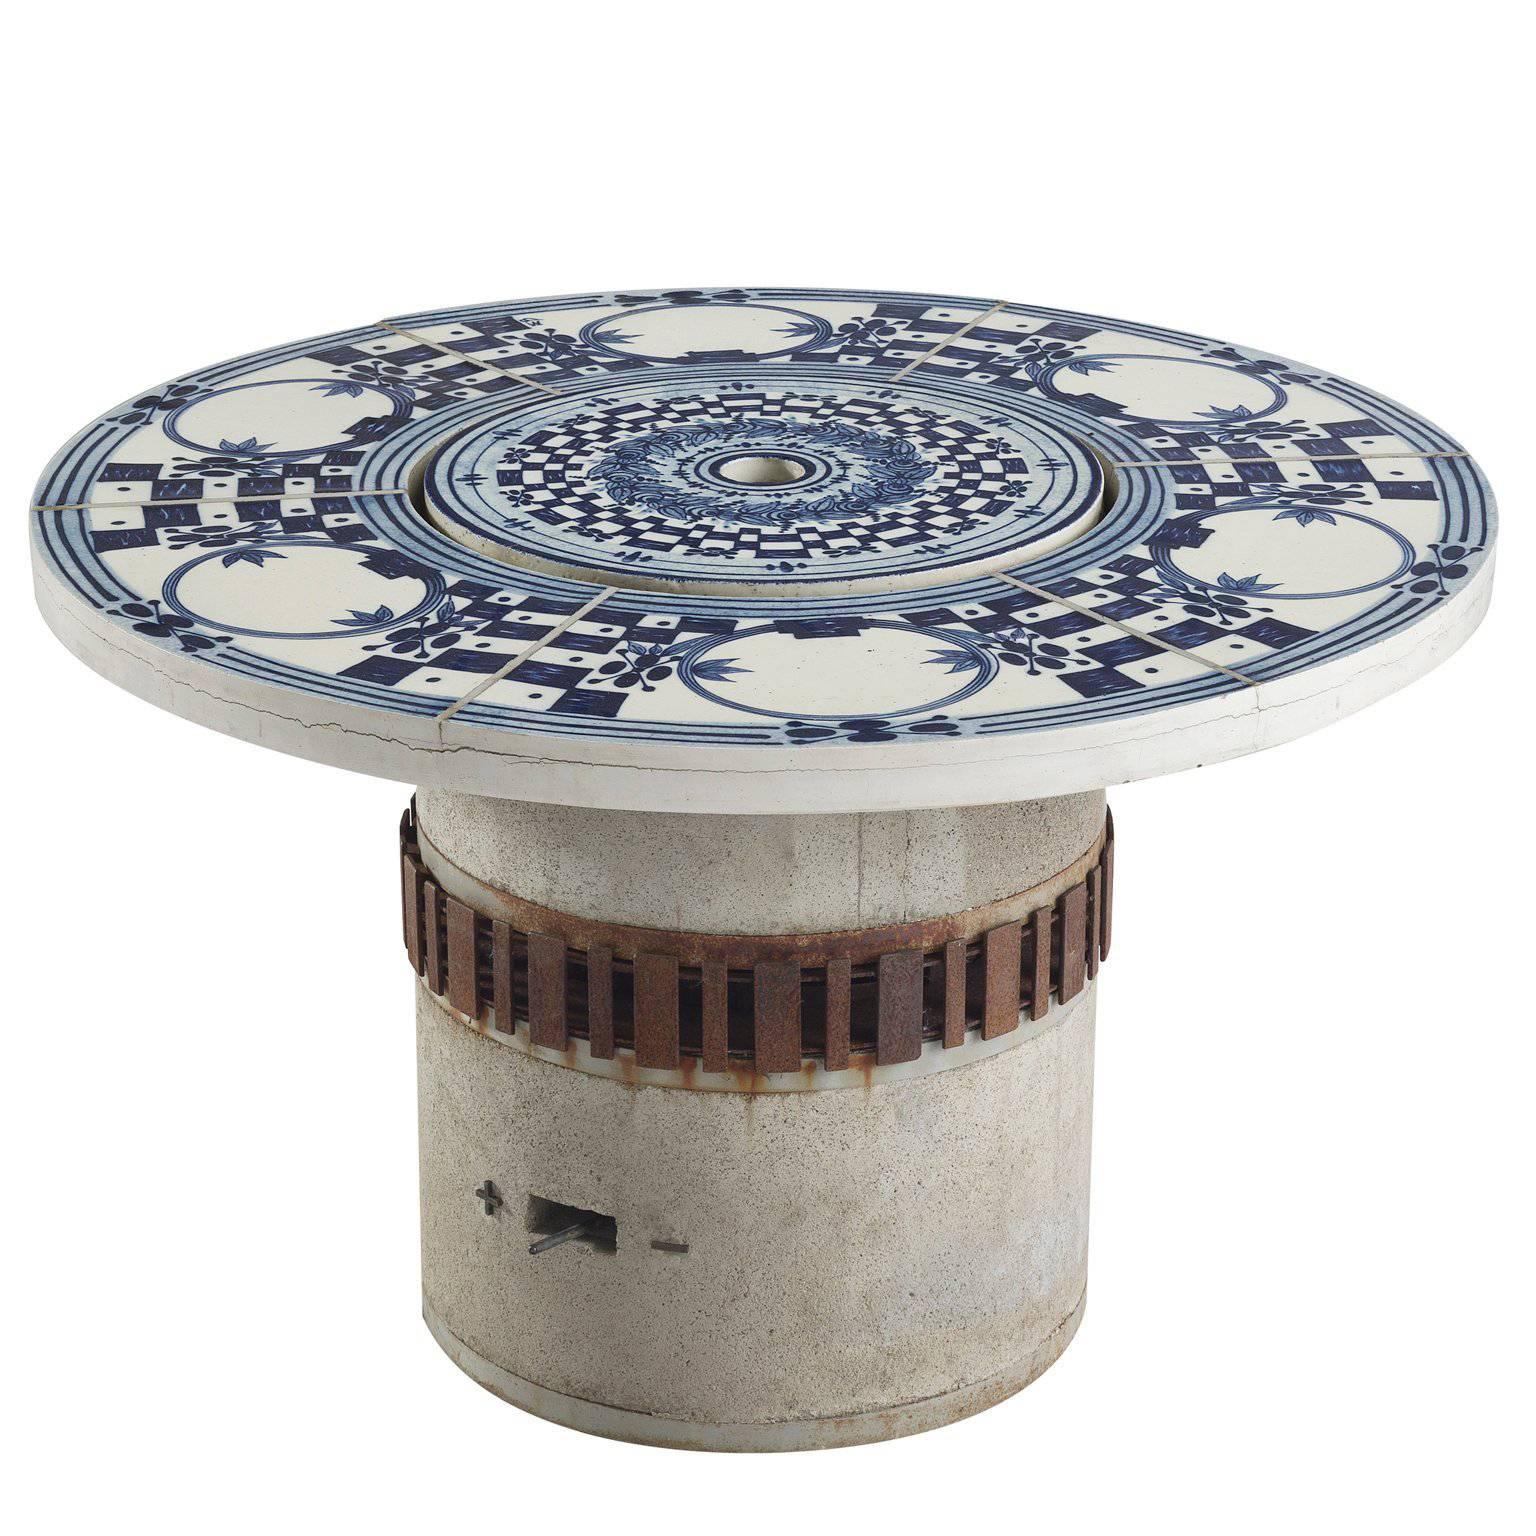 Bjørn Wiinblad 'Hibachi' Patio Grill Table with Hand-Painted Ceramic Top